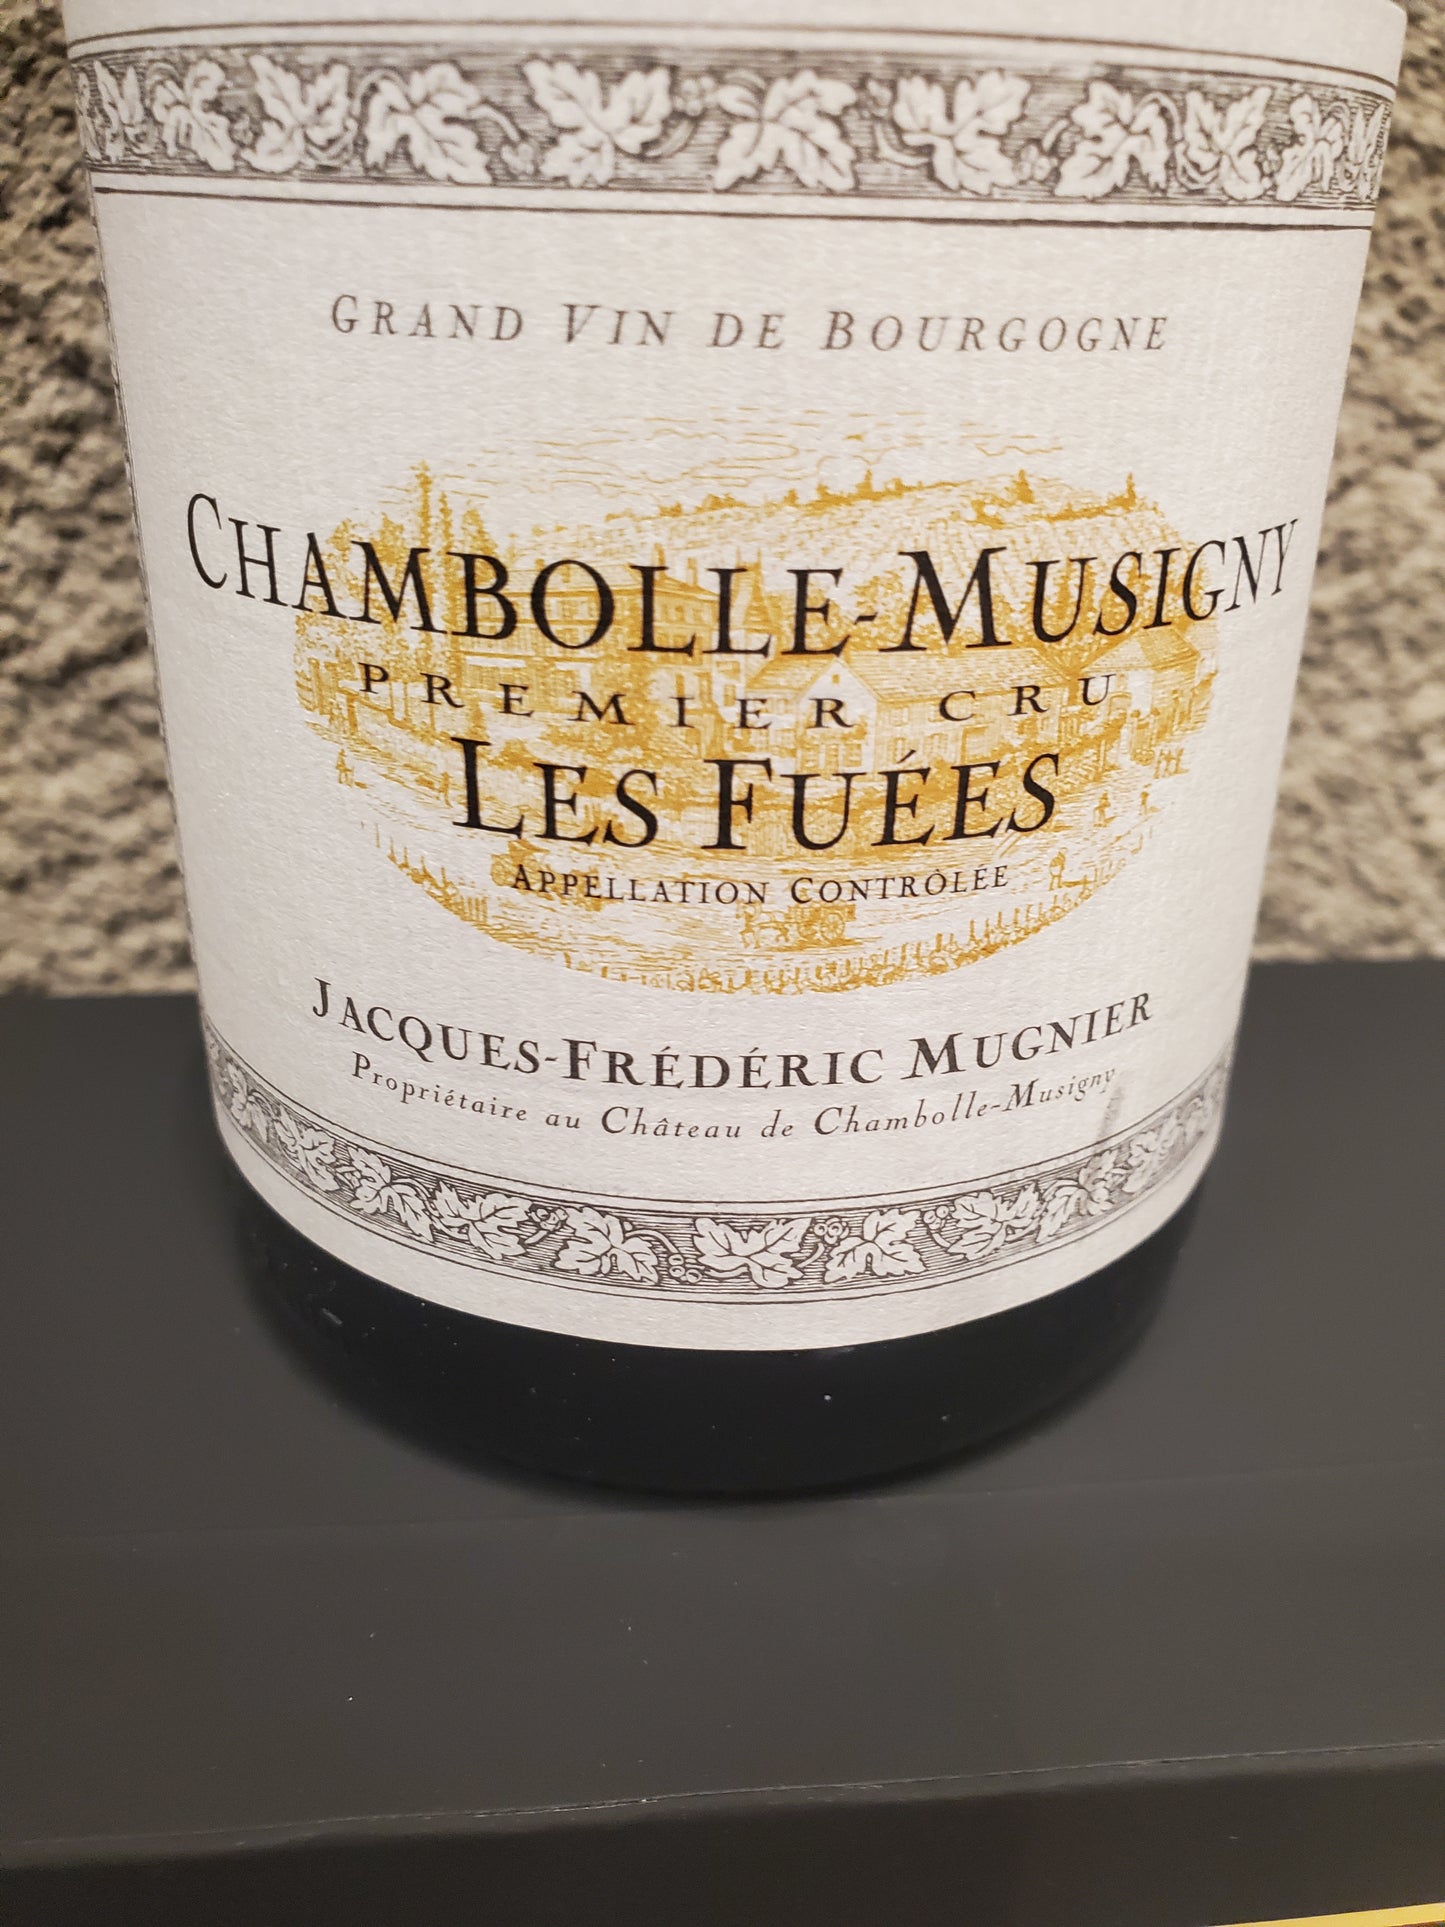 Mugnier Chambolle Musigny 1er Cru les Fuees 2018